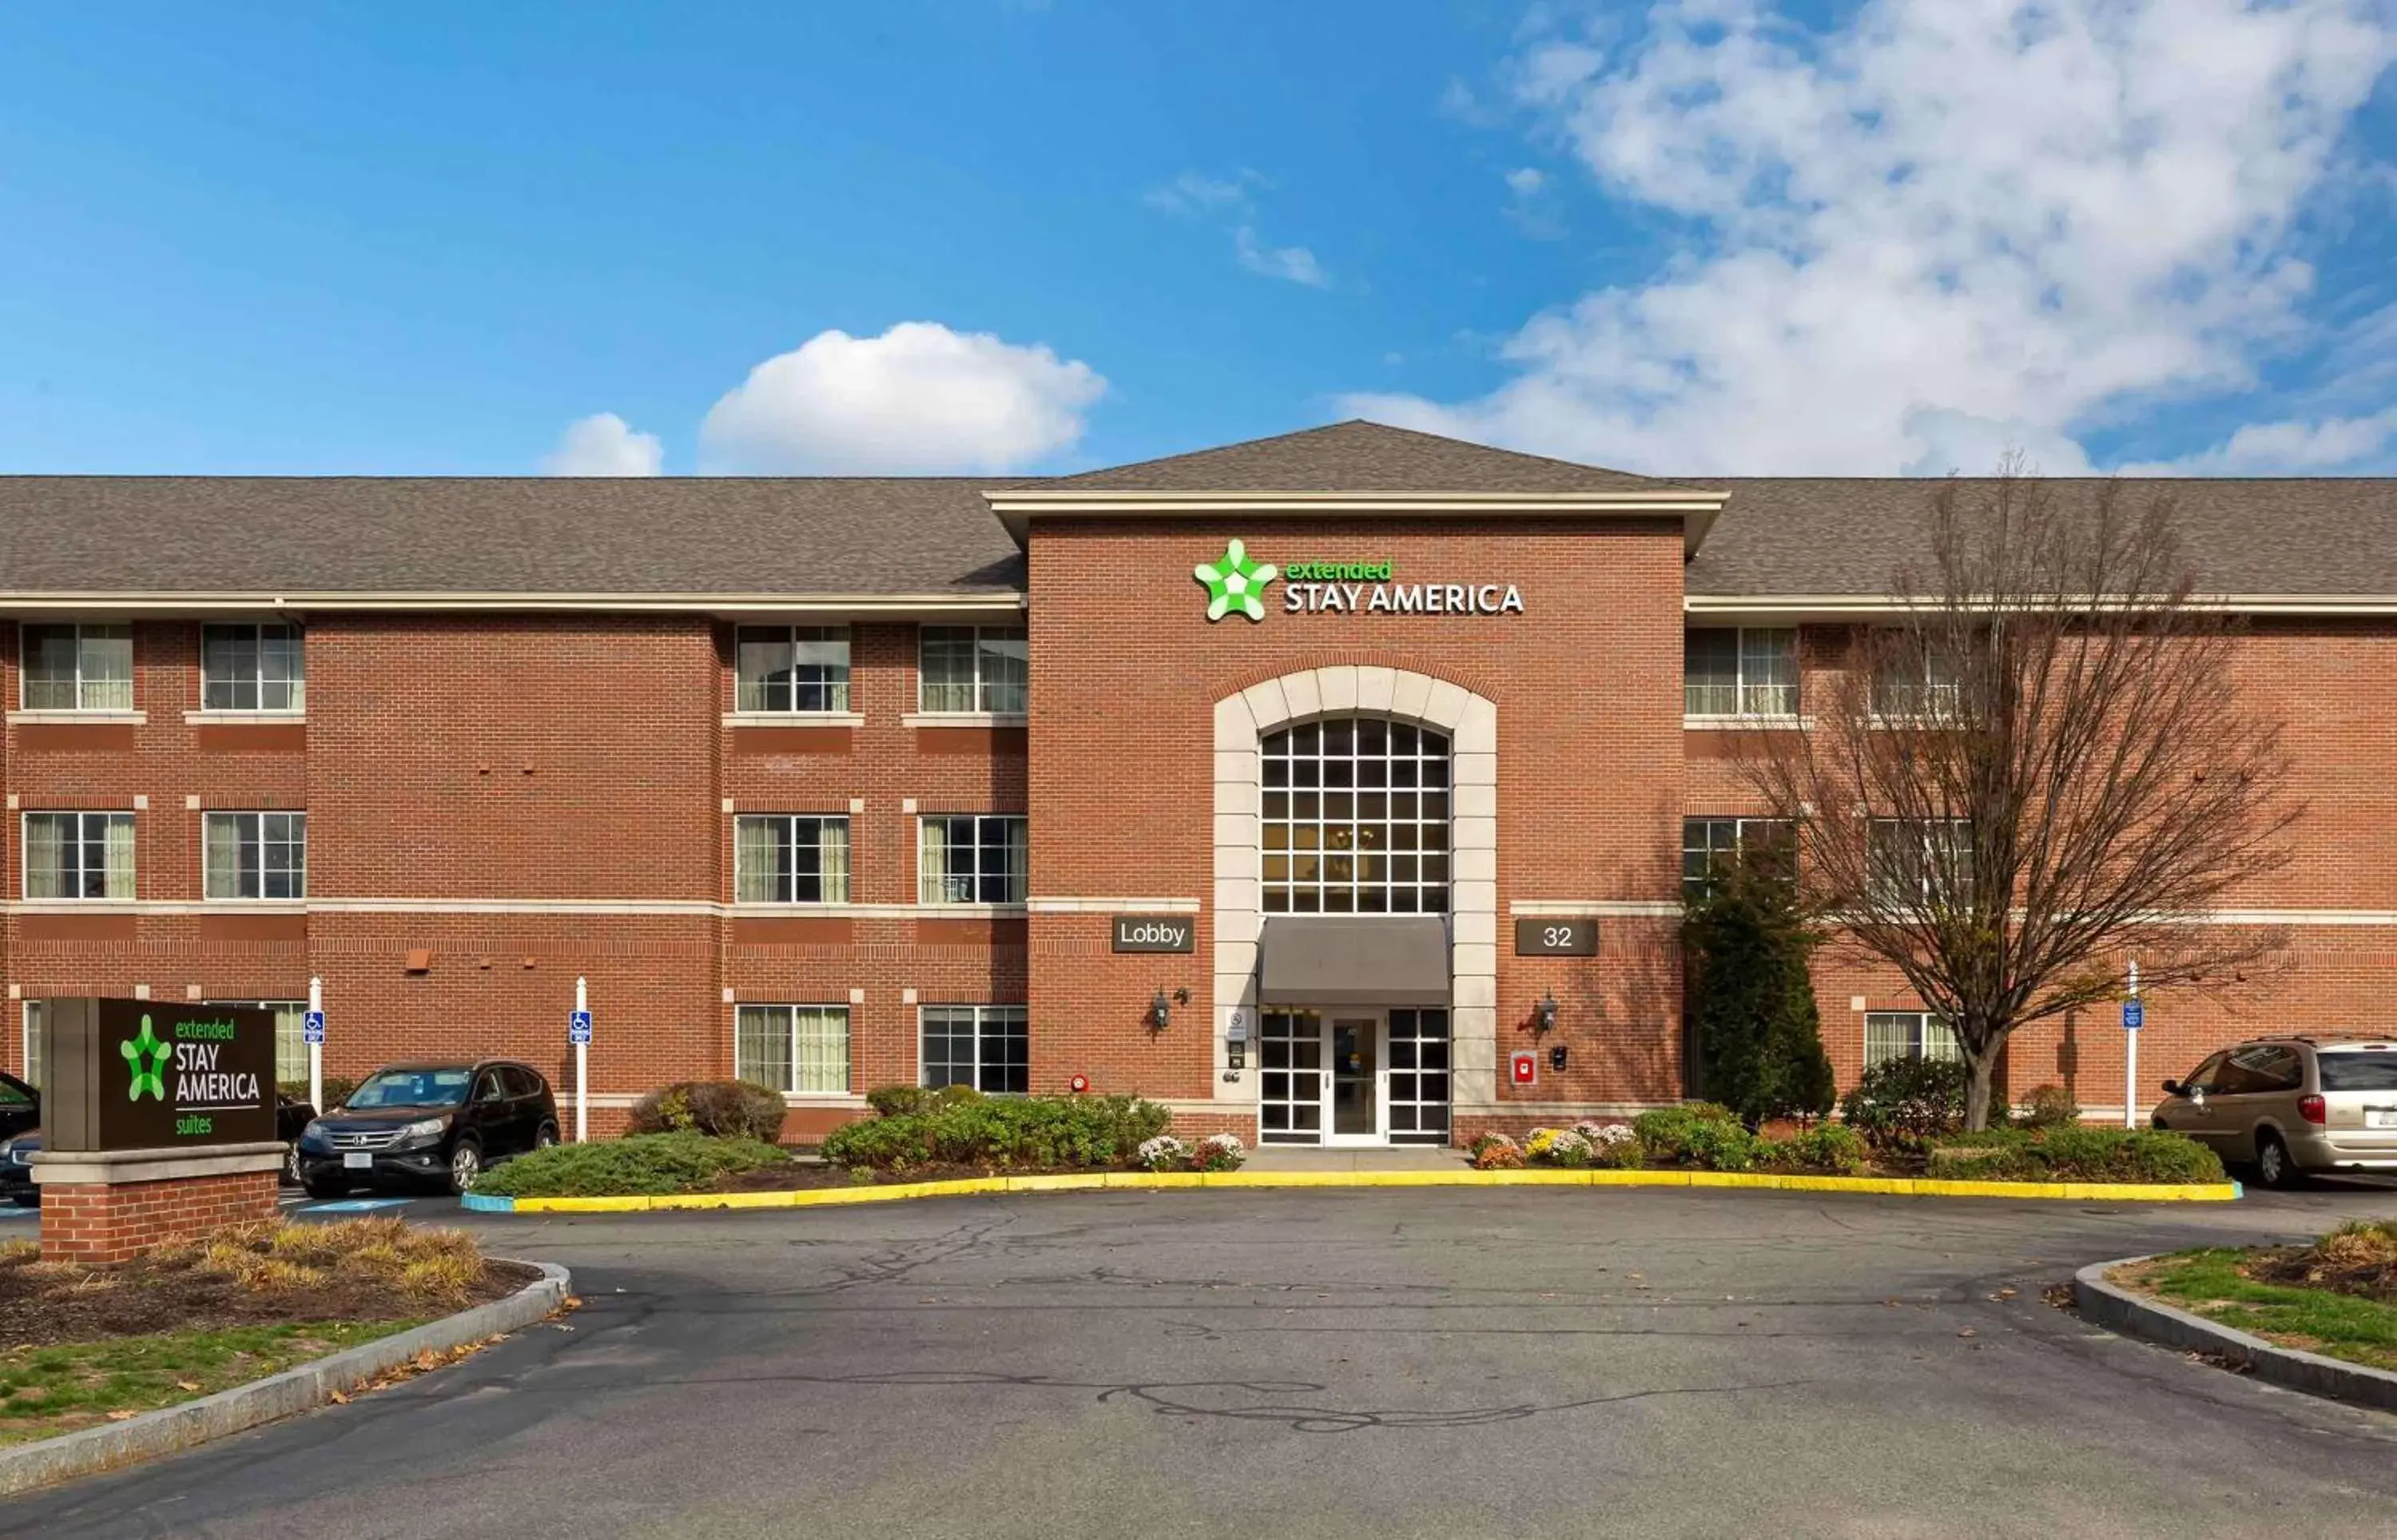 Property Building in Extended Stay America Suites - Boston - Waltham - 32 4th Ave